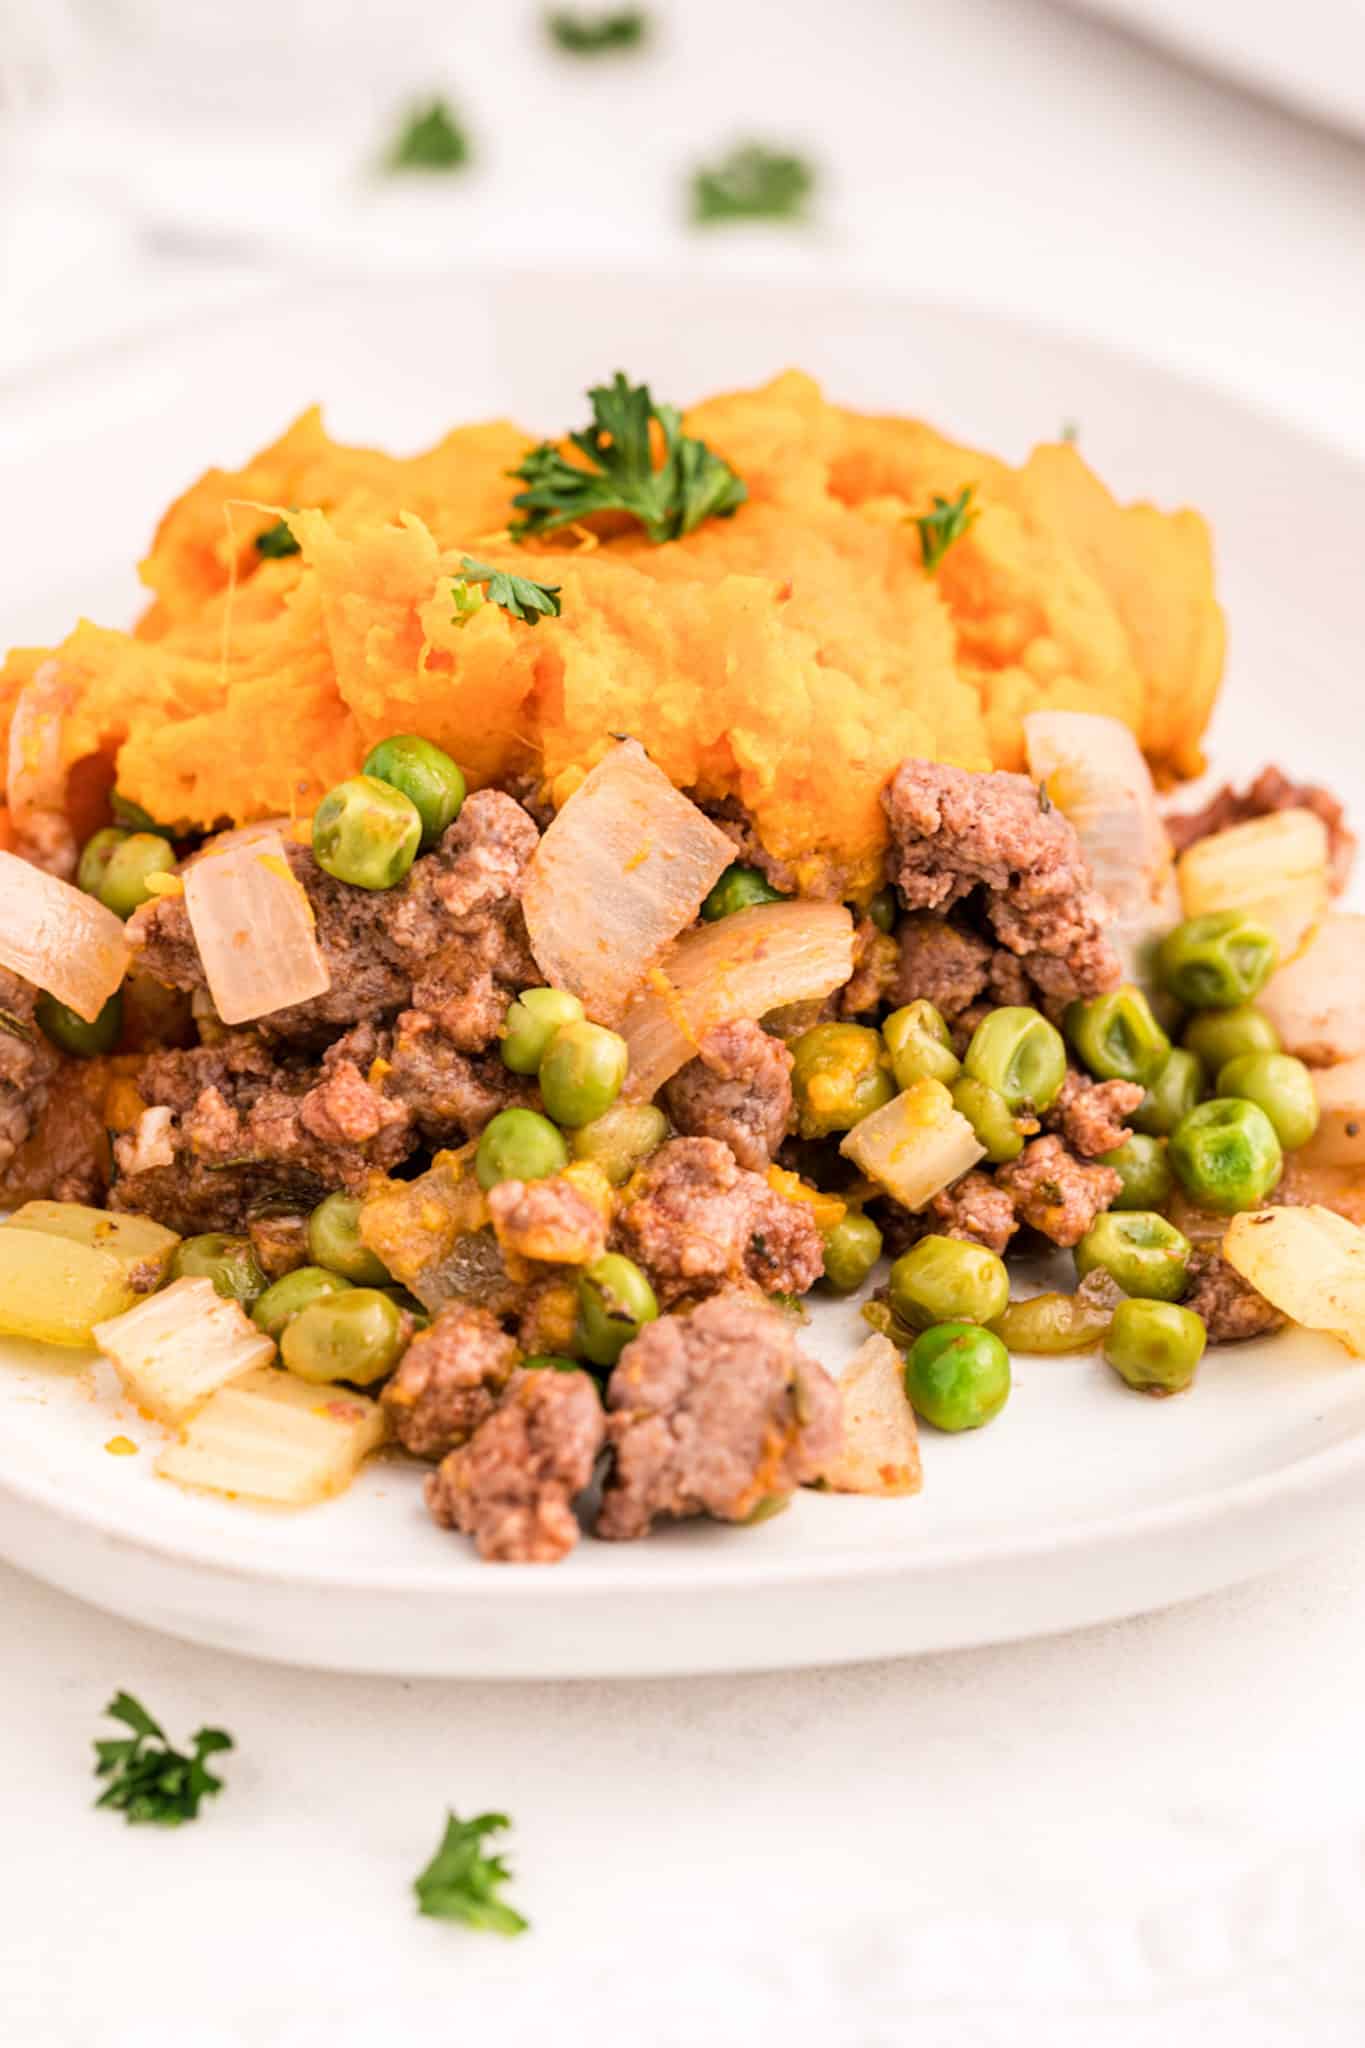 serving of shepherd's pie with meat and veggies